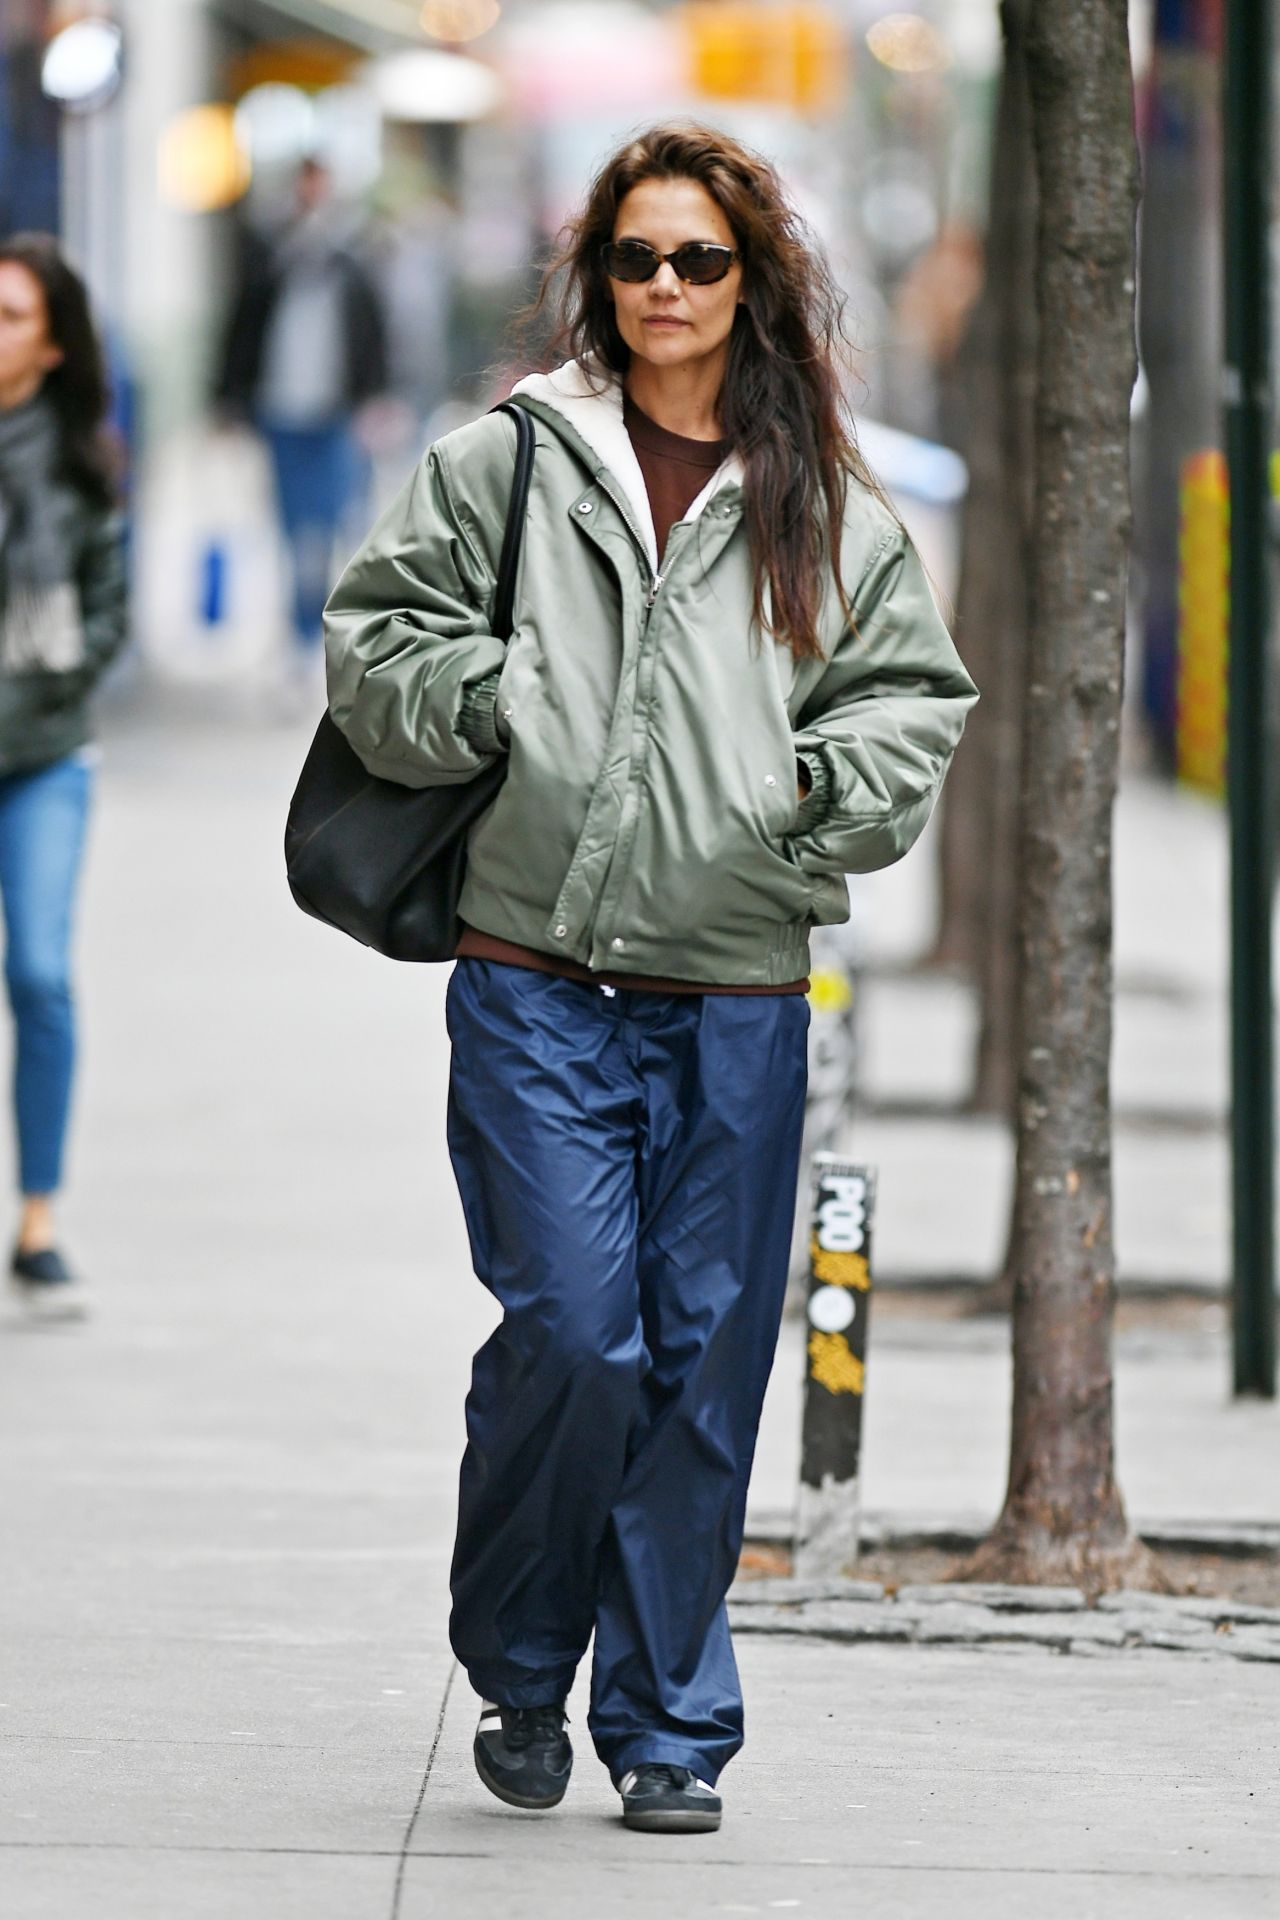 Katie Holmes in a Green Olive Rain Jacket and Navy Blue Rain Pants